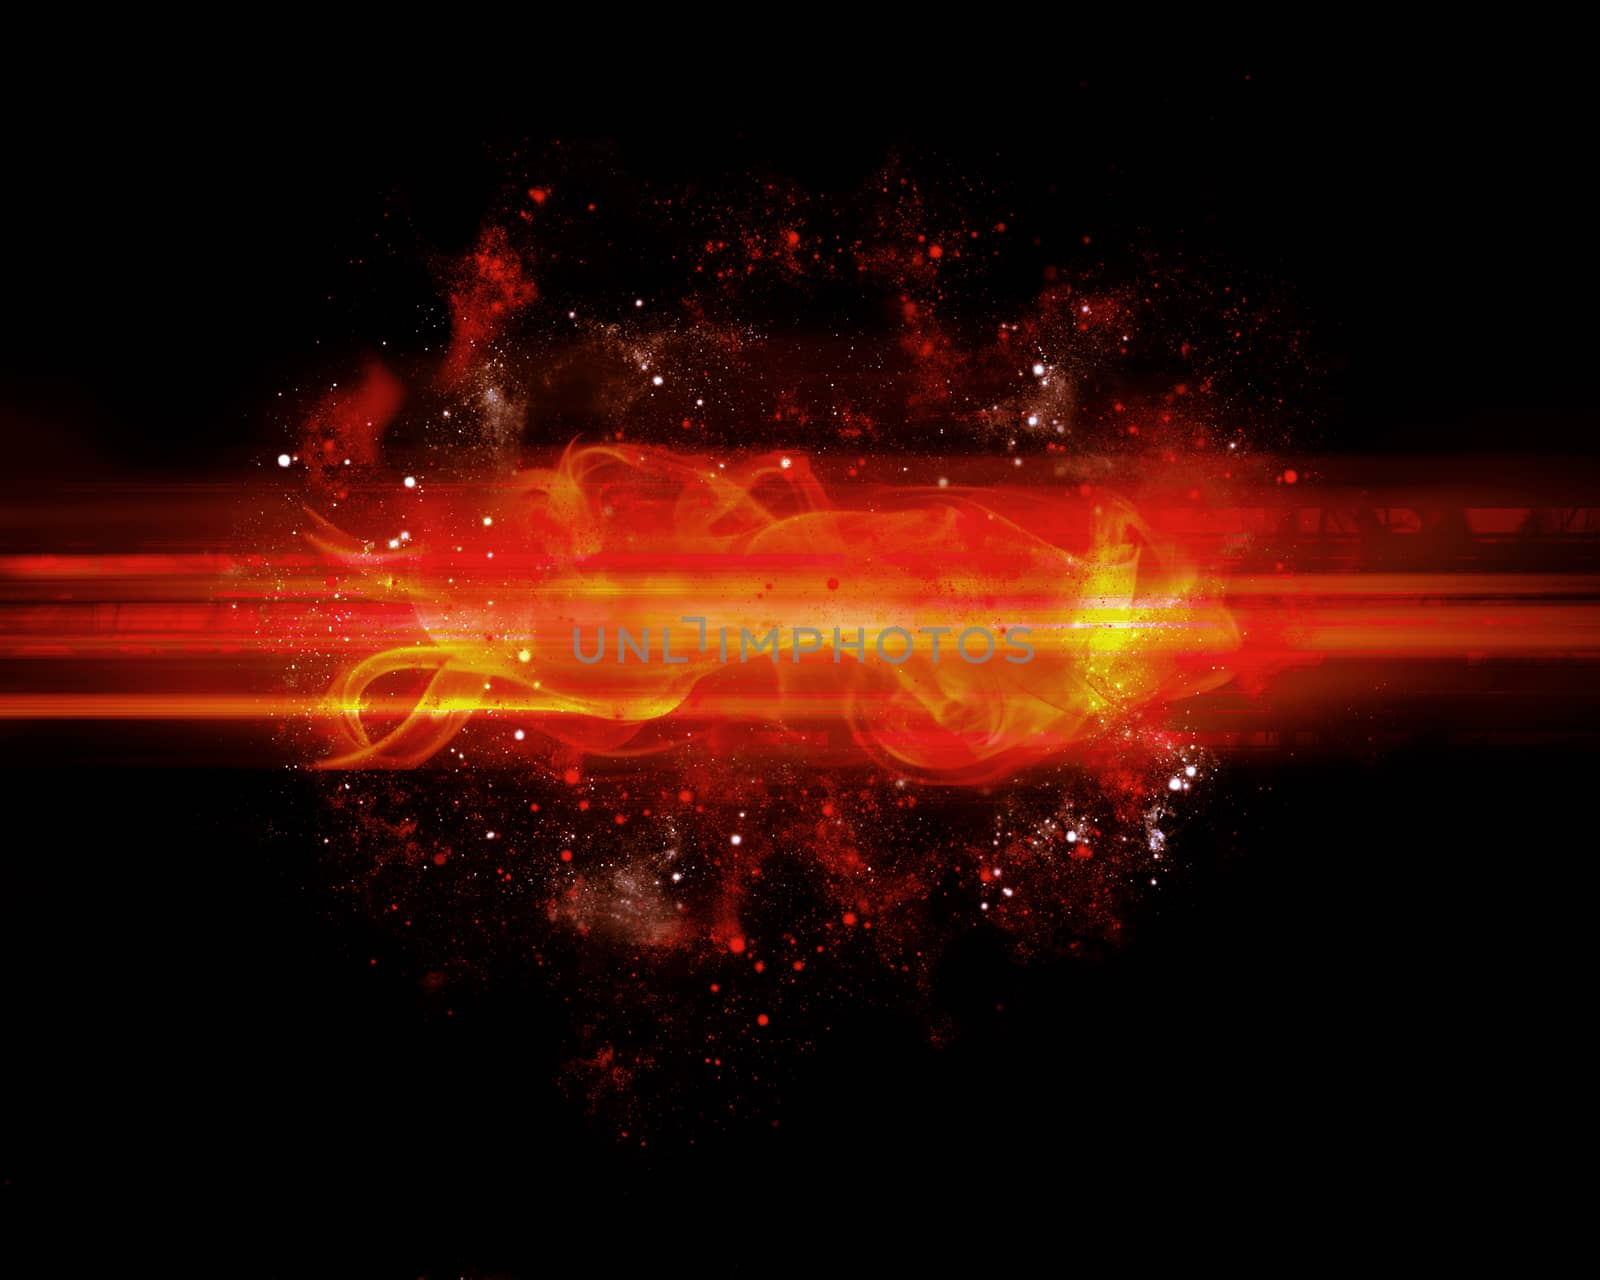 black abstract background with red flame explosion